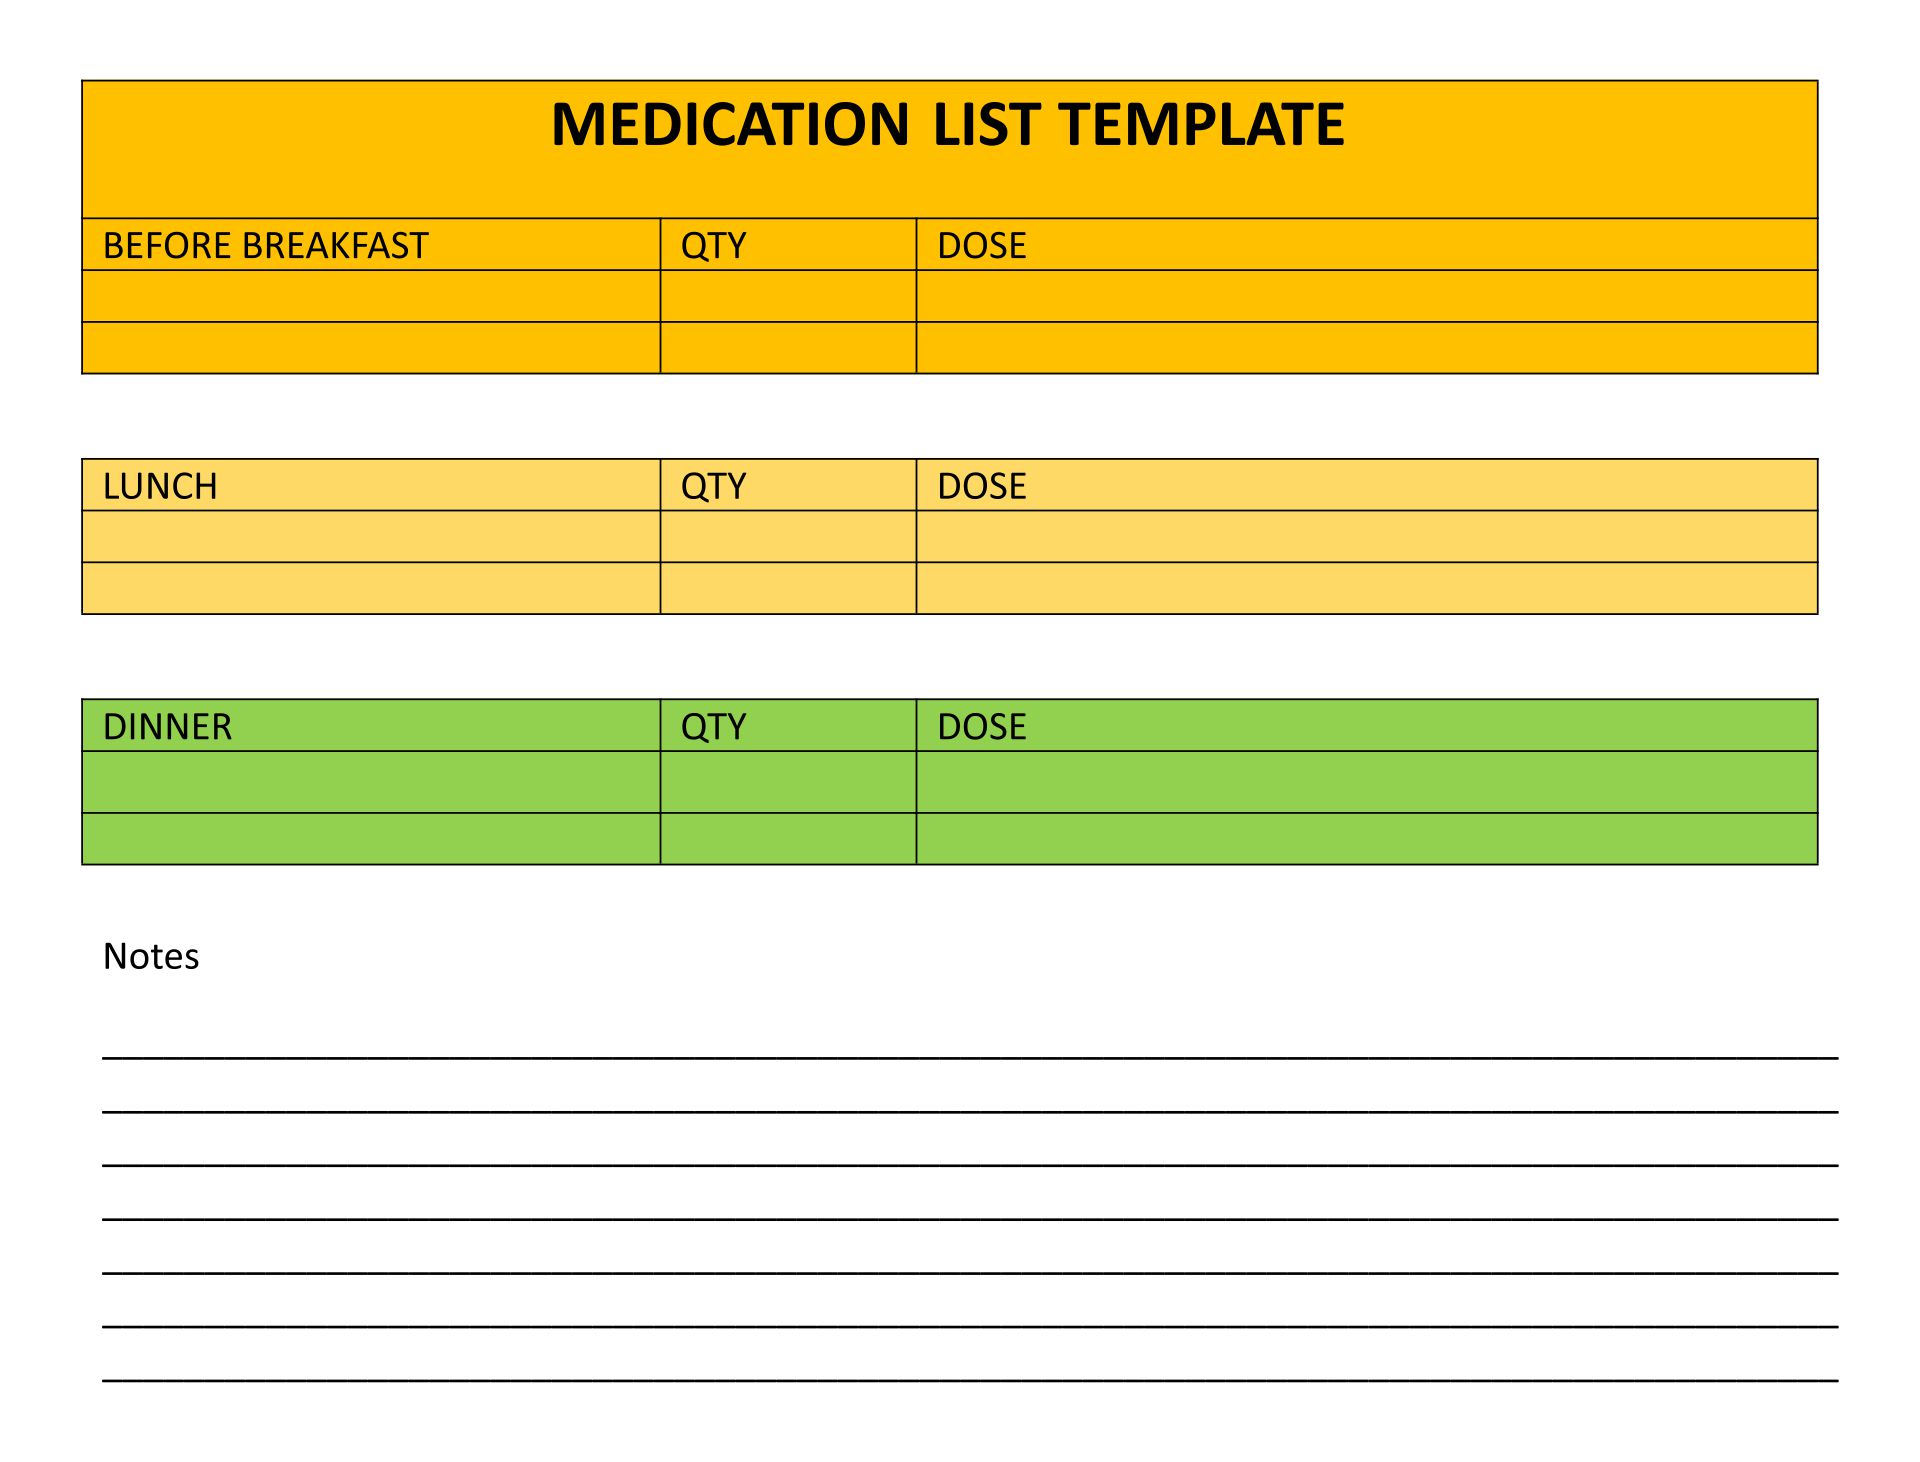 Medication Schedule For 3 Times A Day